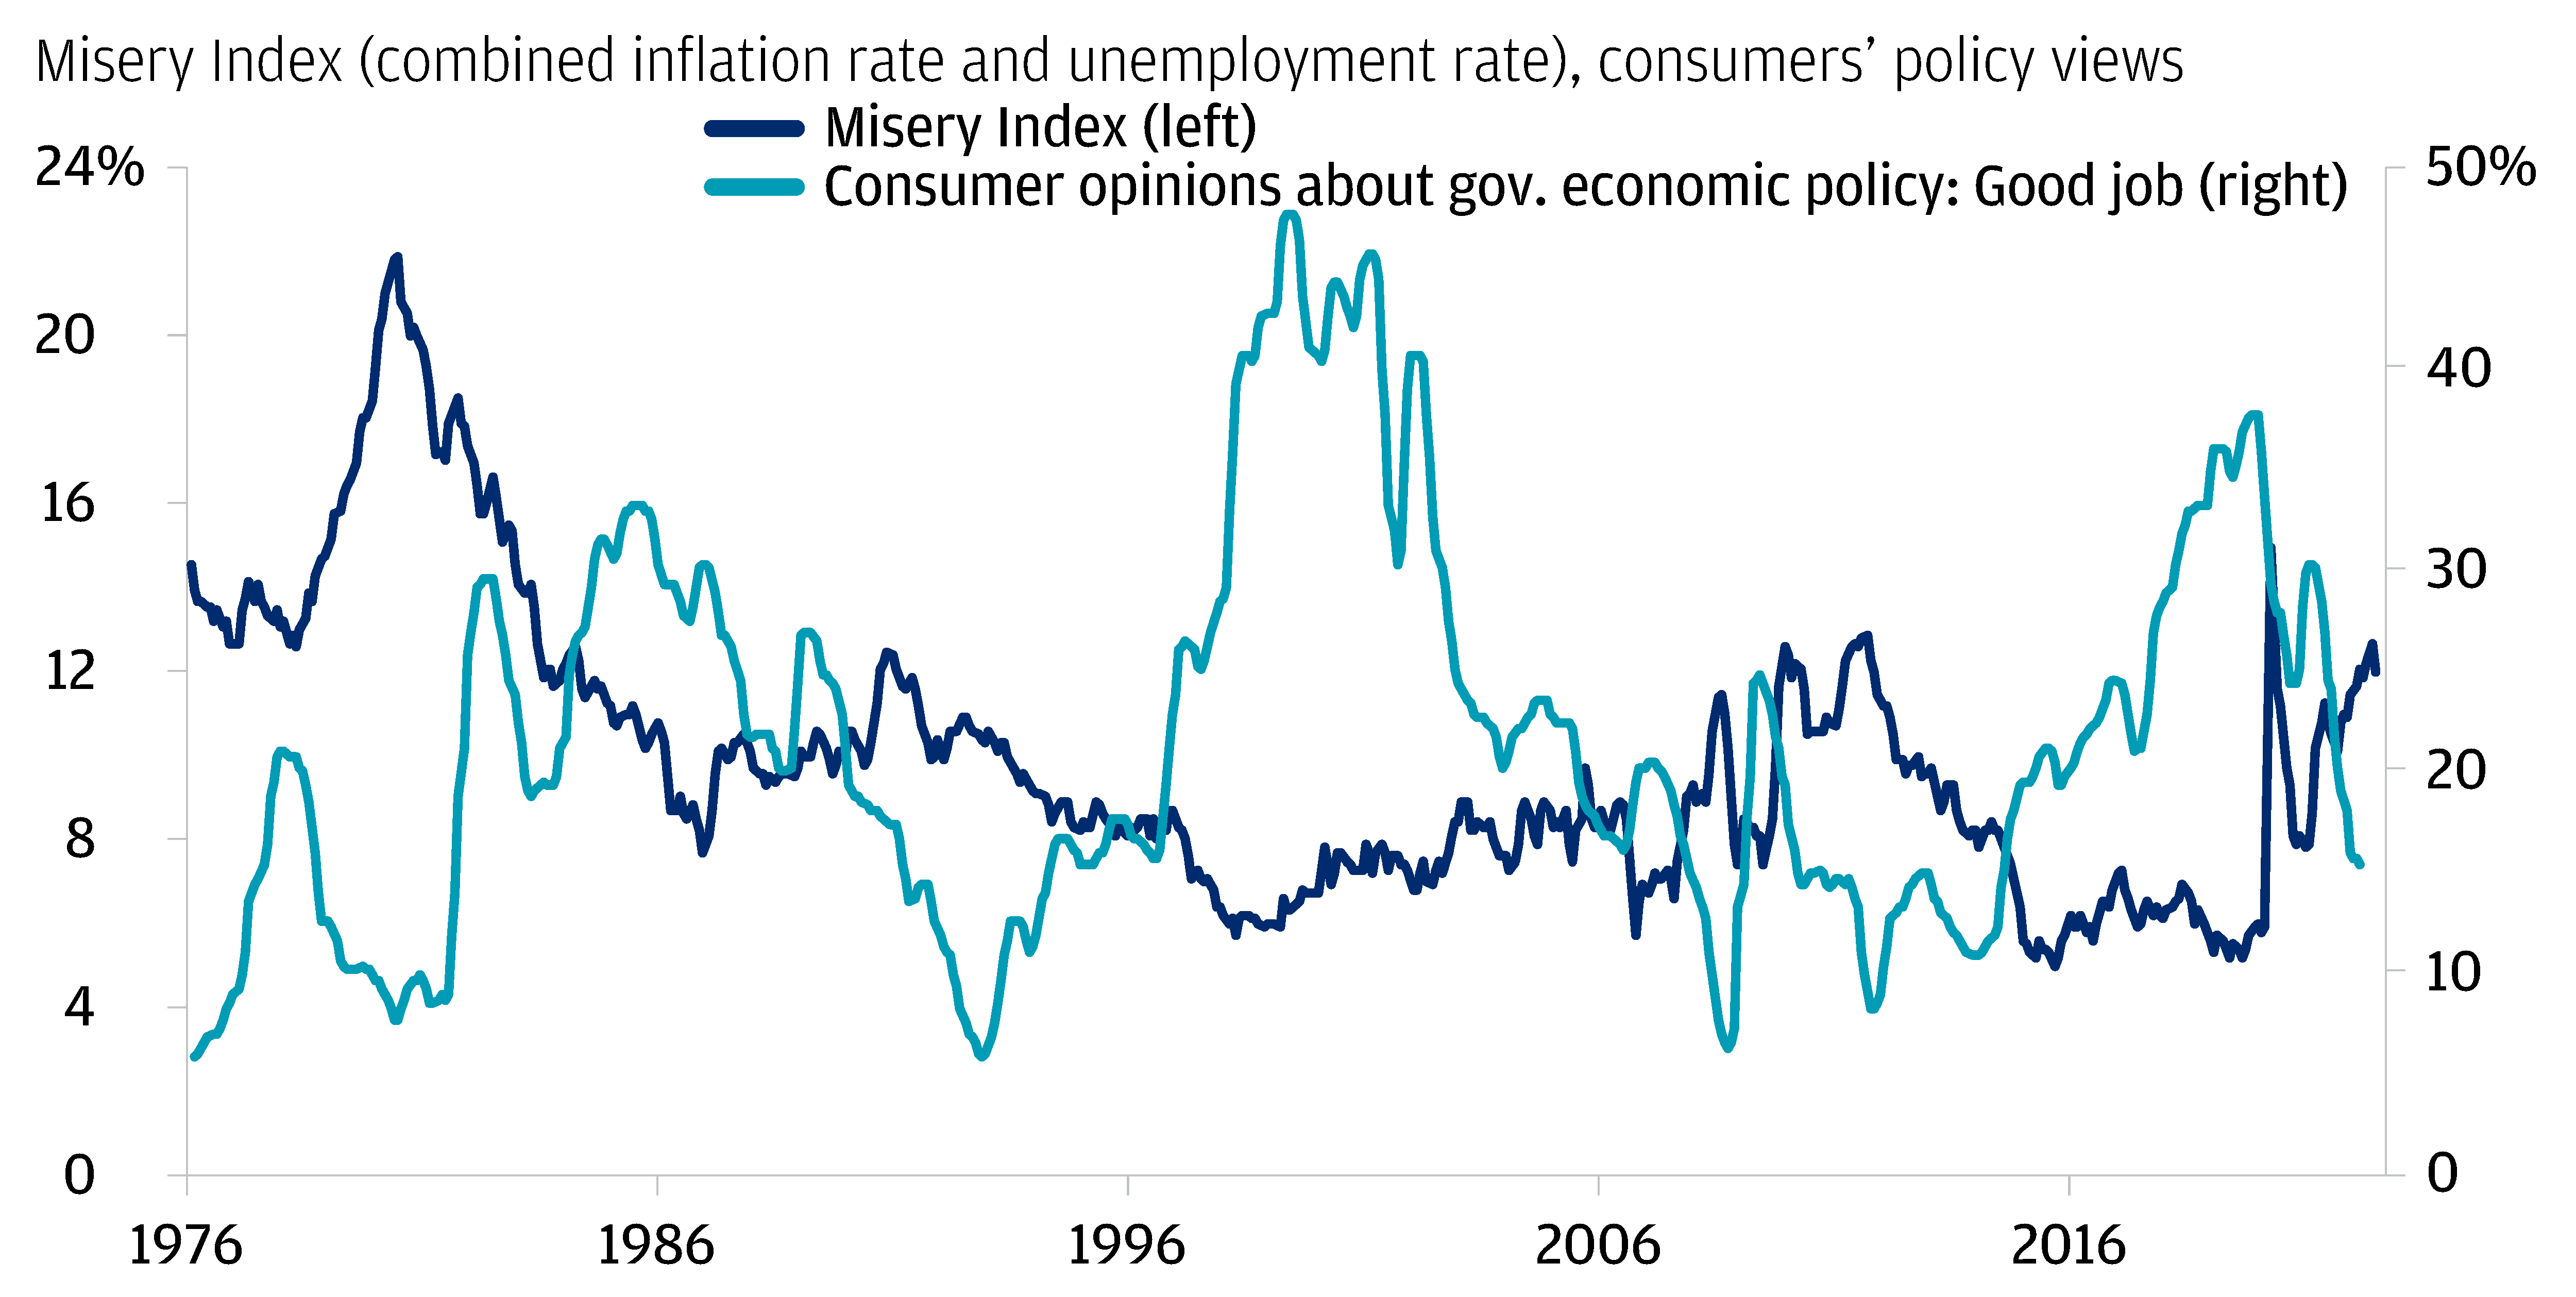 High inflation is currently driving the misery index higher